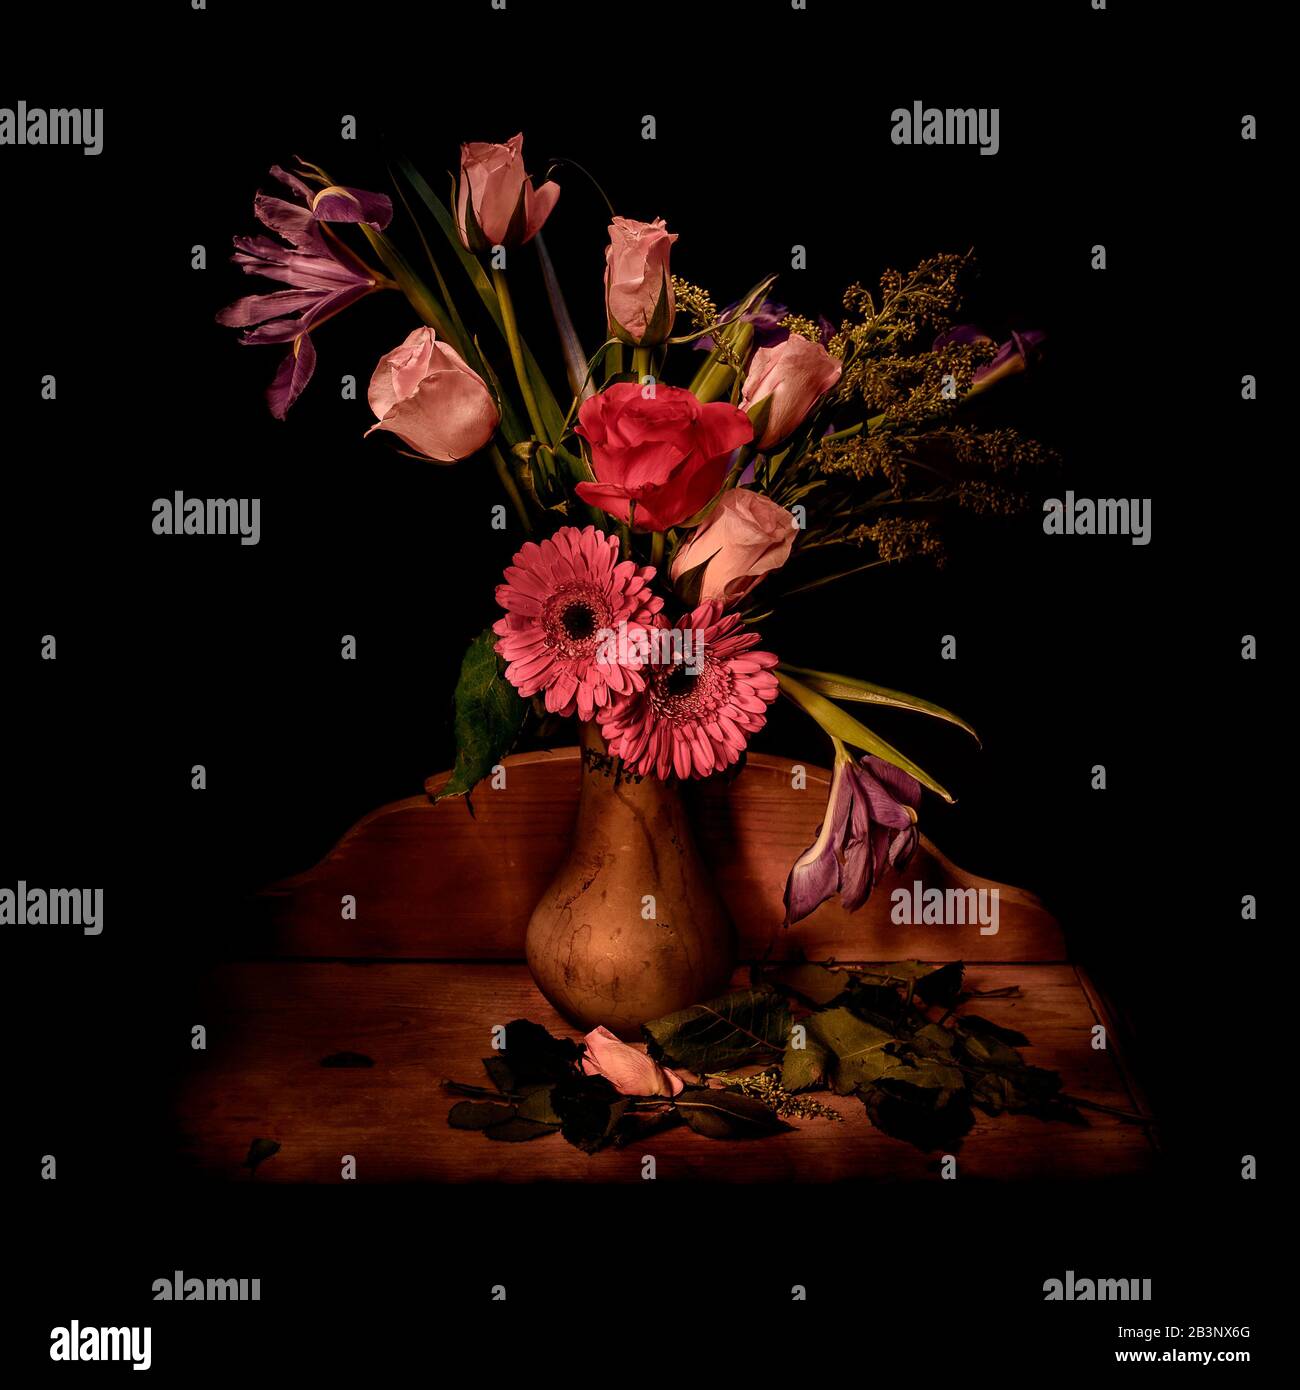 A Vase of Flowers photographed in the style of an Old Master. Stock Photo